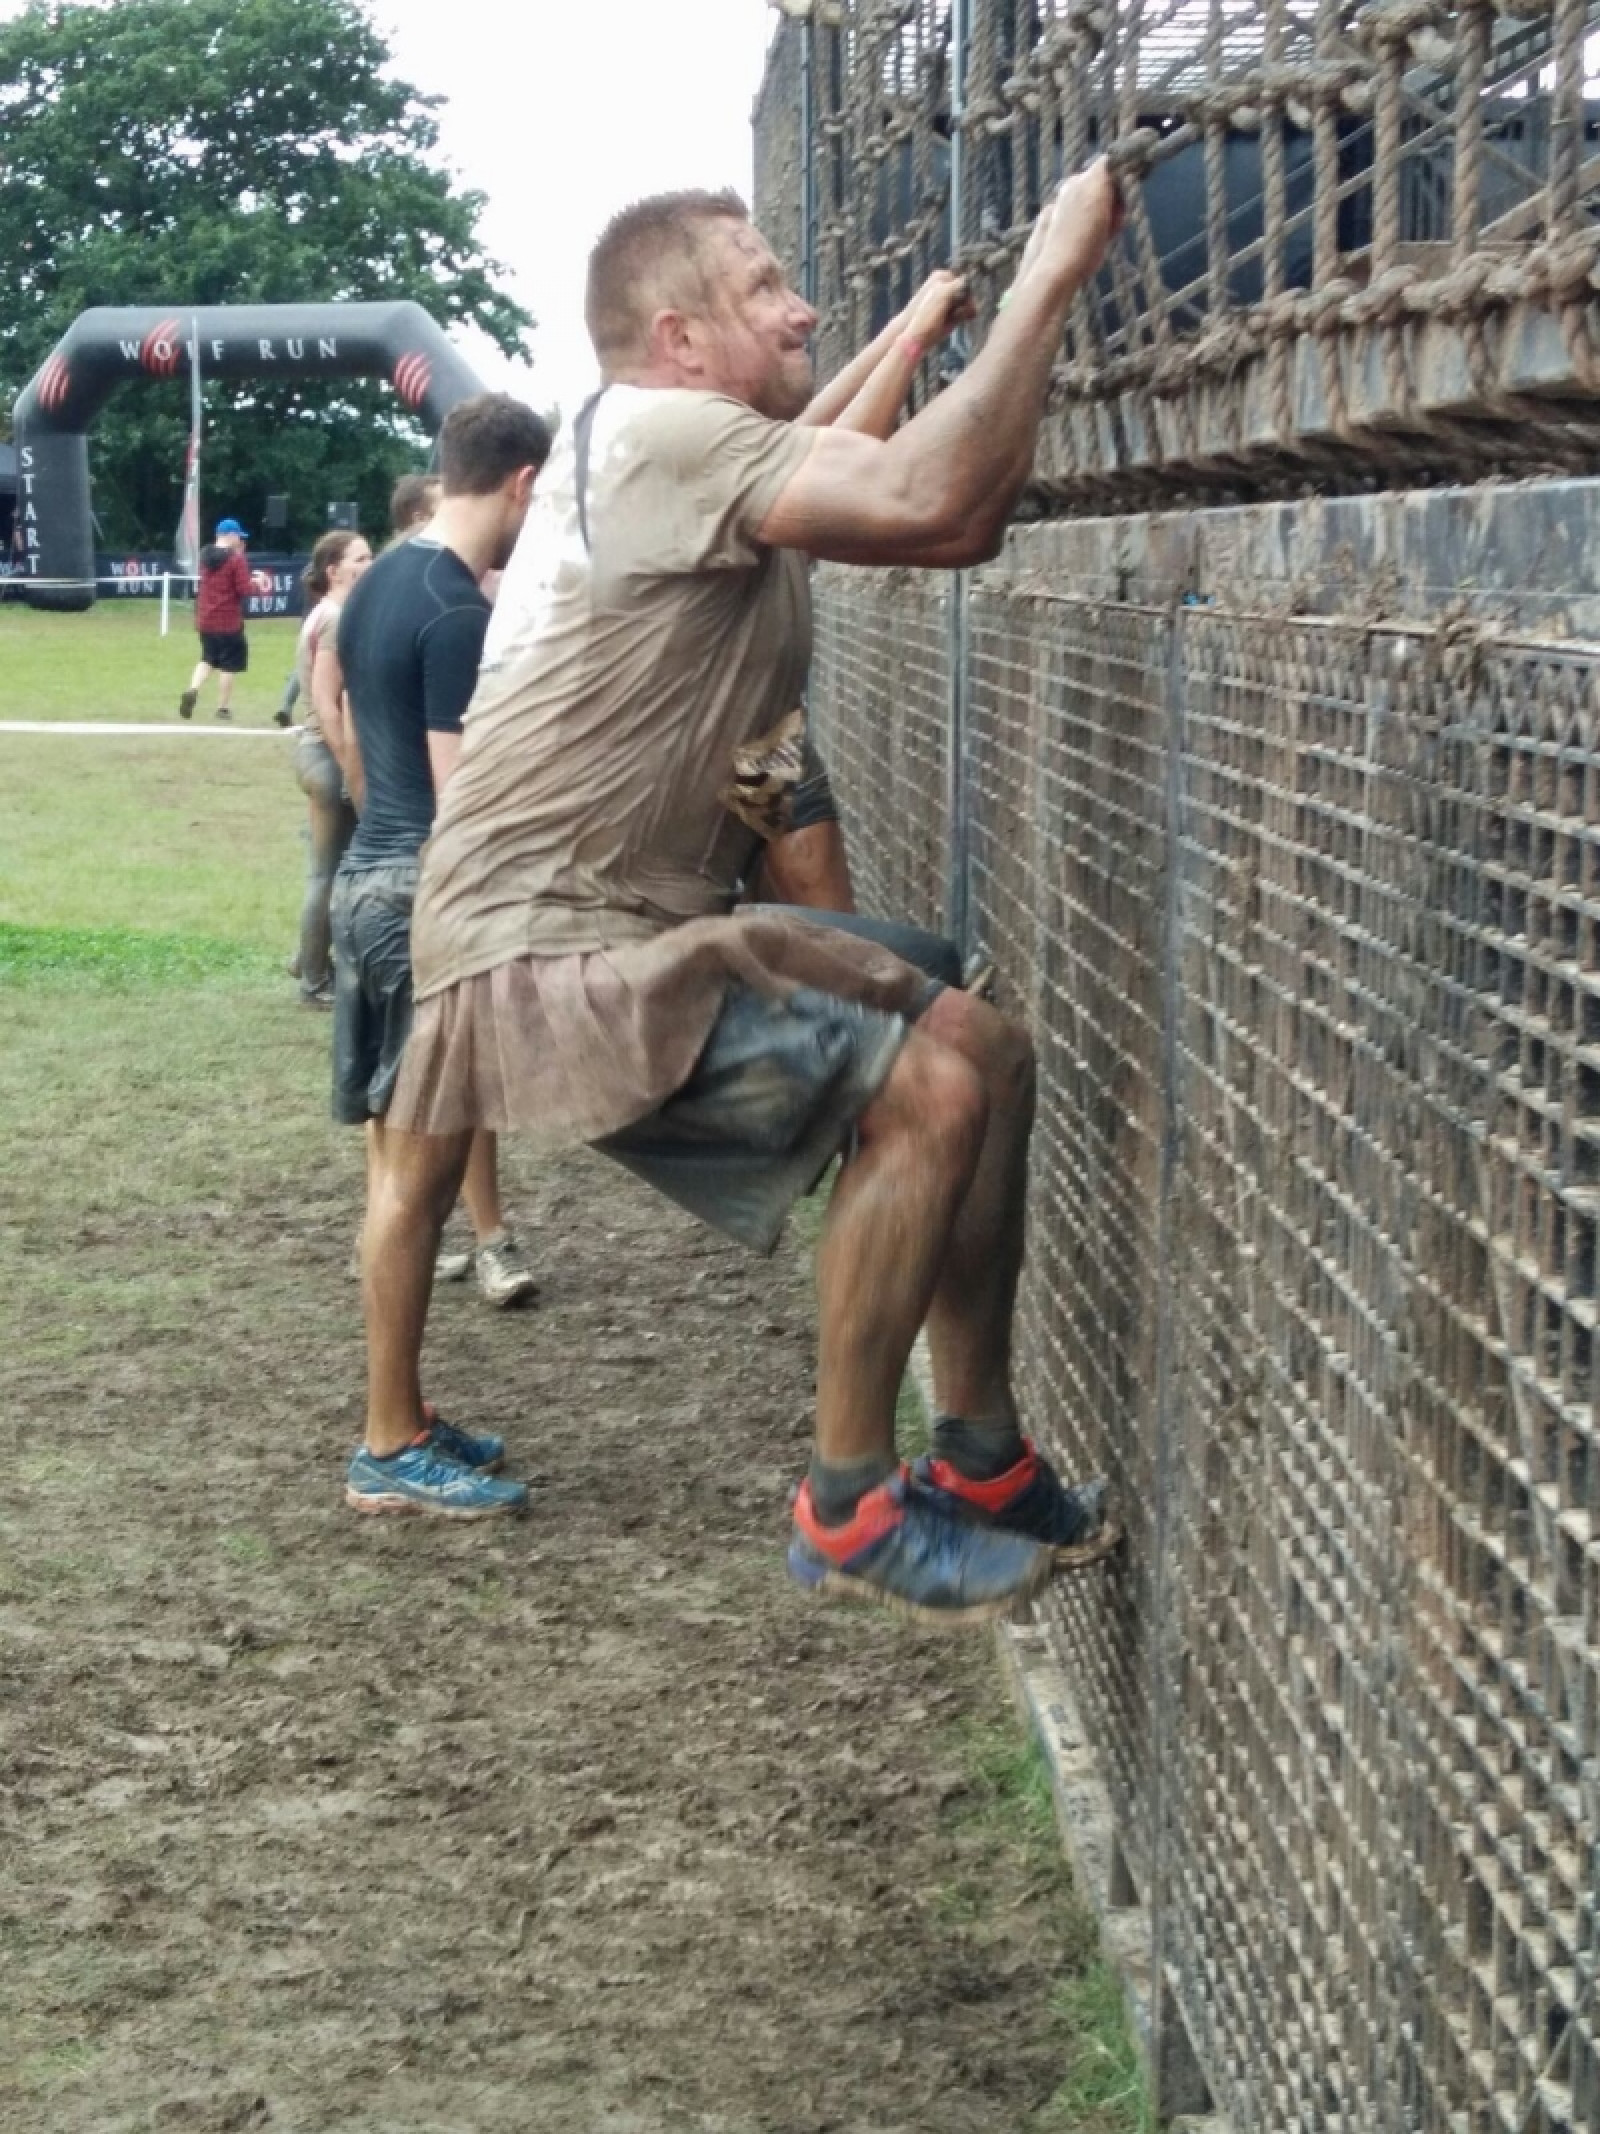 The Wolf Run getting slightly dirty now!